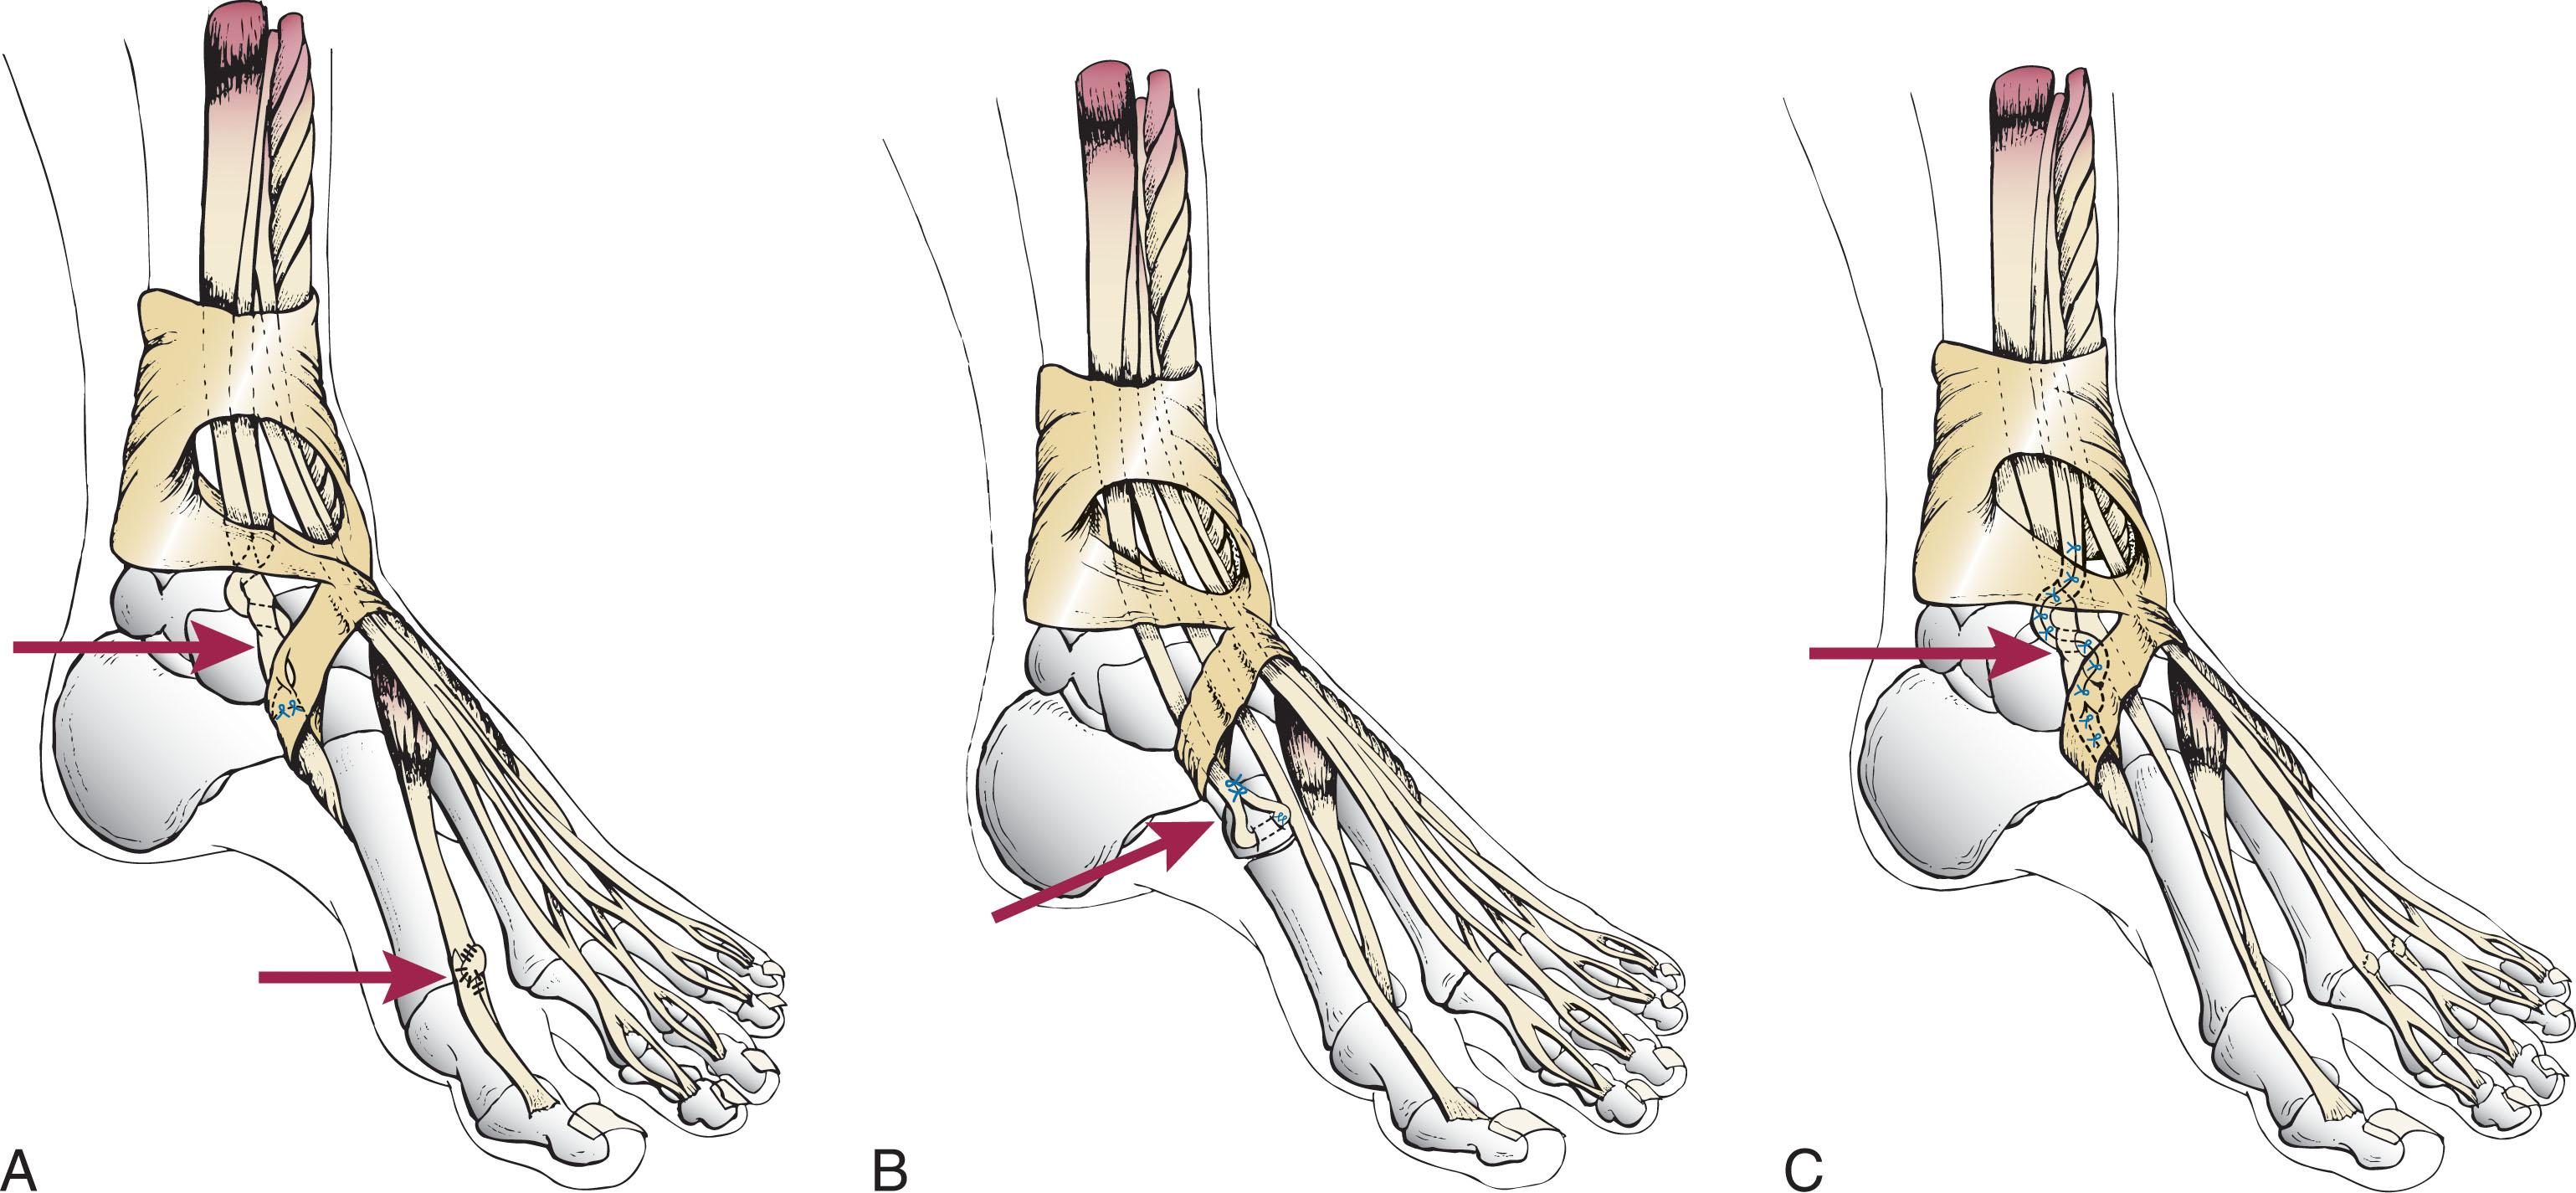 Fig. 28-17, A , Reconstruction of anterior tibial tendon using Pulvertaft weave of extensor hallucis longus tendon into distal anterior tibial tendon. B , Reconstruction of distal rupture of anterior tibial tendon. Tendon is advanced through a horizontal drill hole in the navicular or first cuneiform and sutured to itself. C , Reconstruction of ruptured anterior tibial tendon using Kelikian procedure. Extensor digitorum longus (EDL) tendon to second and third toes is woven through anterior tibial tendon. EDL tendon to second and third toes is tenodesed to the extensor digitorum brevis.